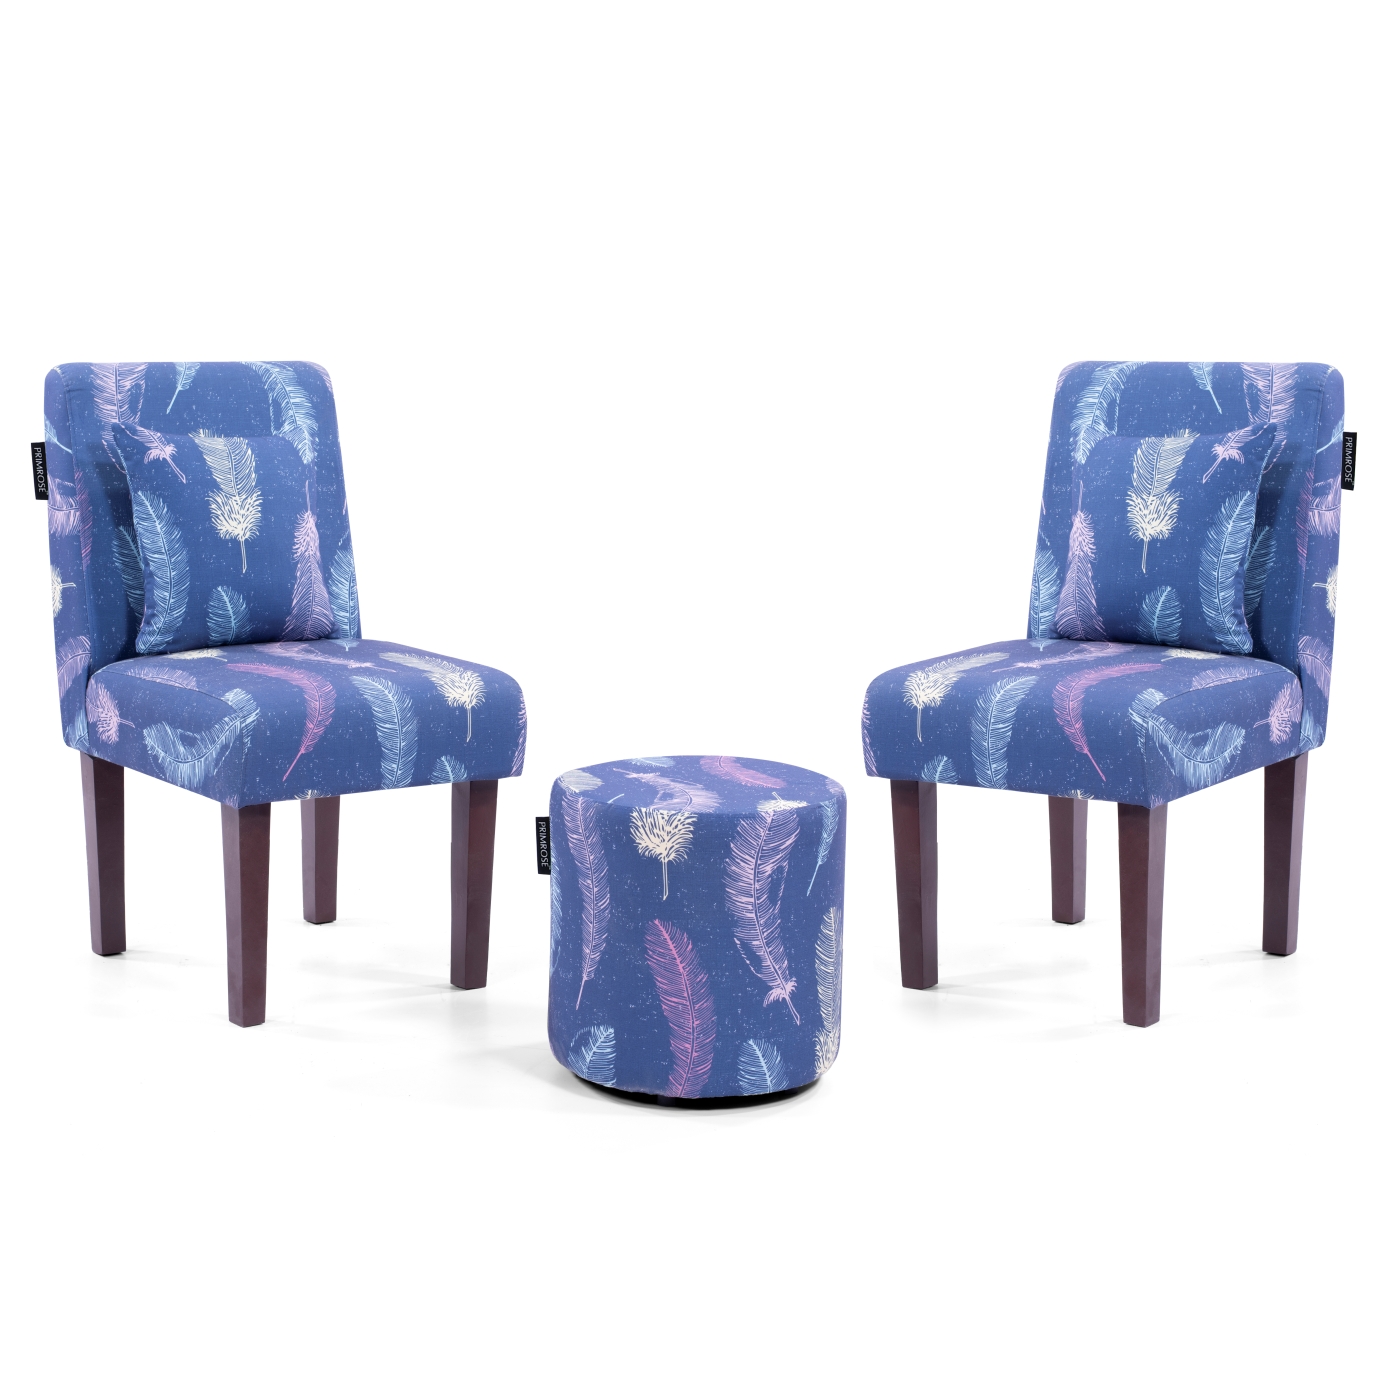 PRIMROSE Betty Dream Feature Digital Printed Faux Linen Fabric Dining Chair Combo (2 Chair+1 Ottoman) - Blue  